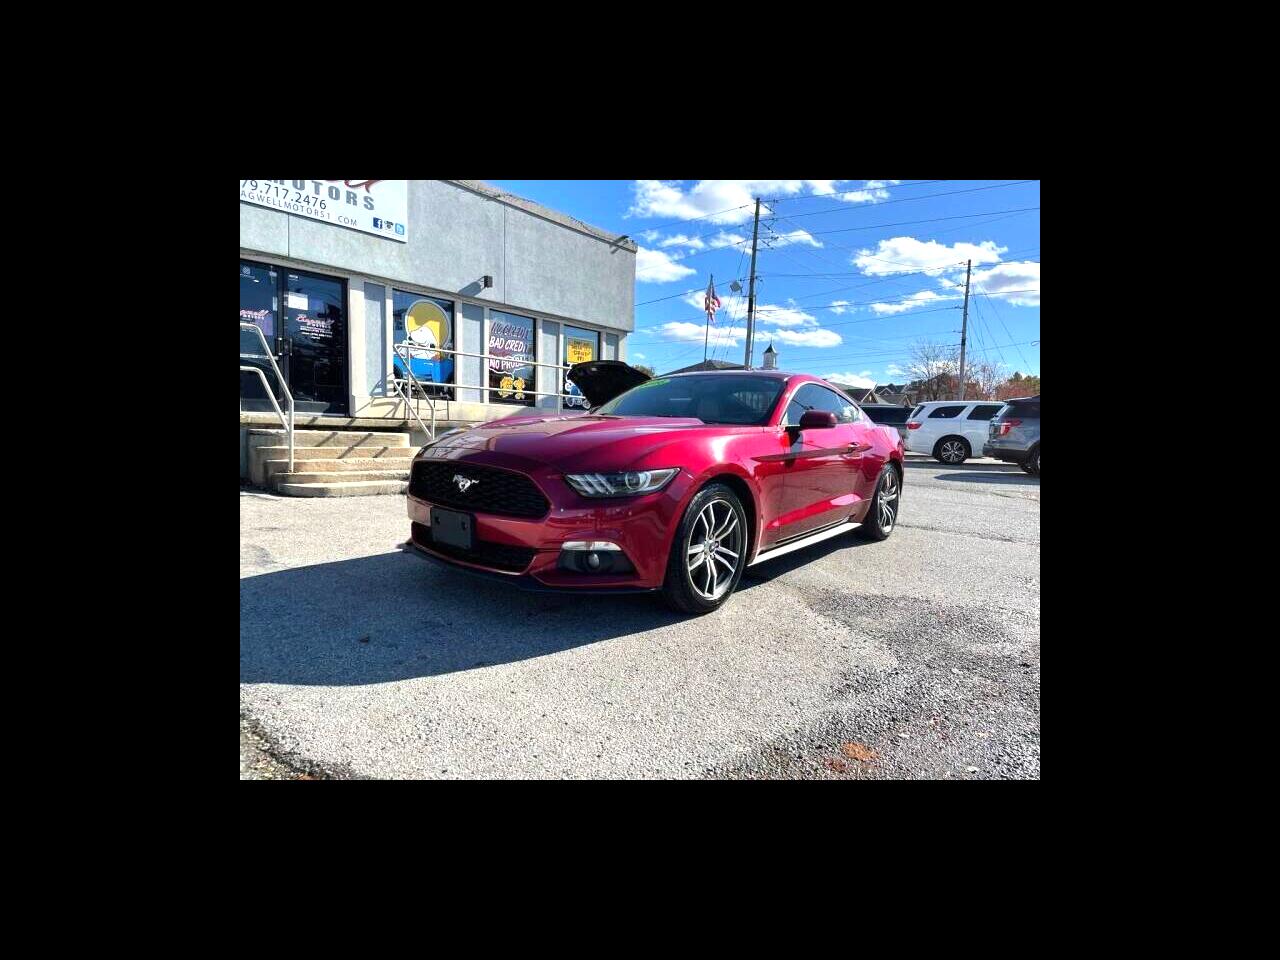 Ford Mustang EcoBoost Coupe 2016